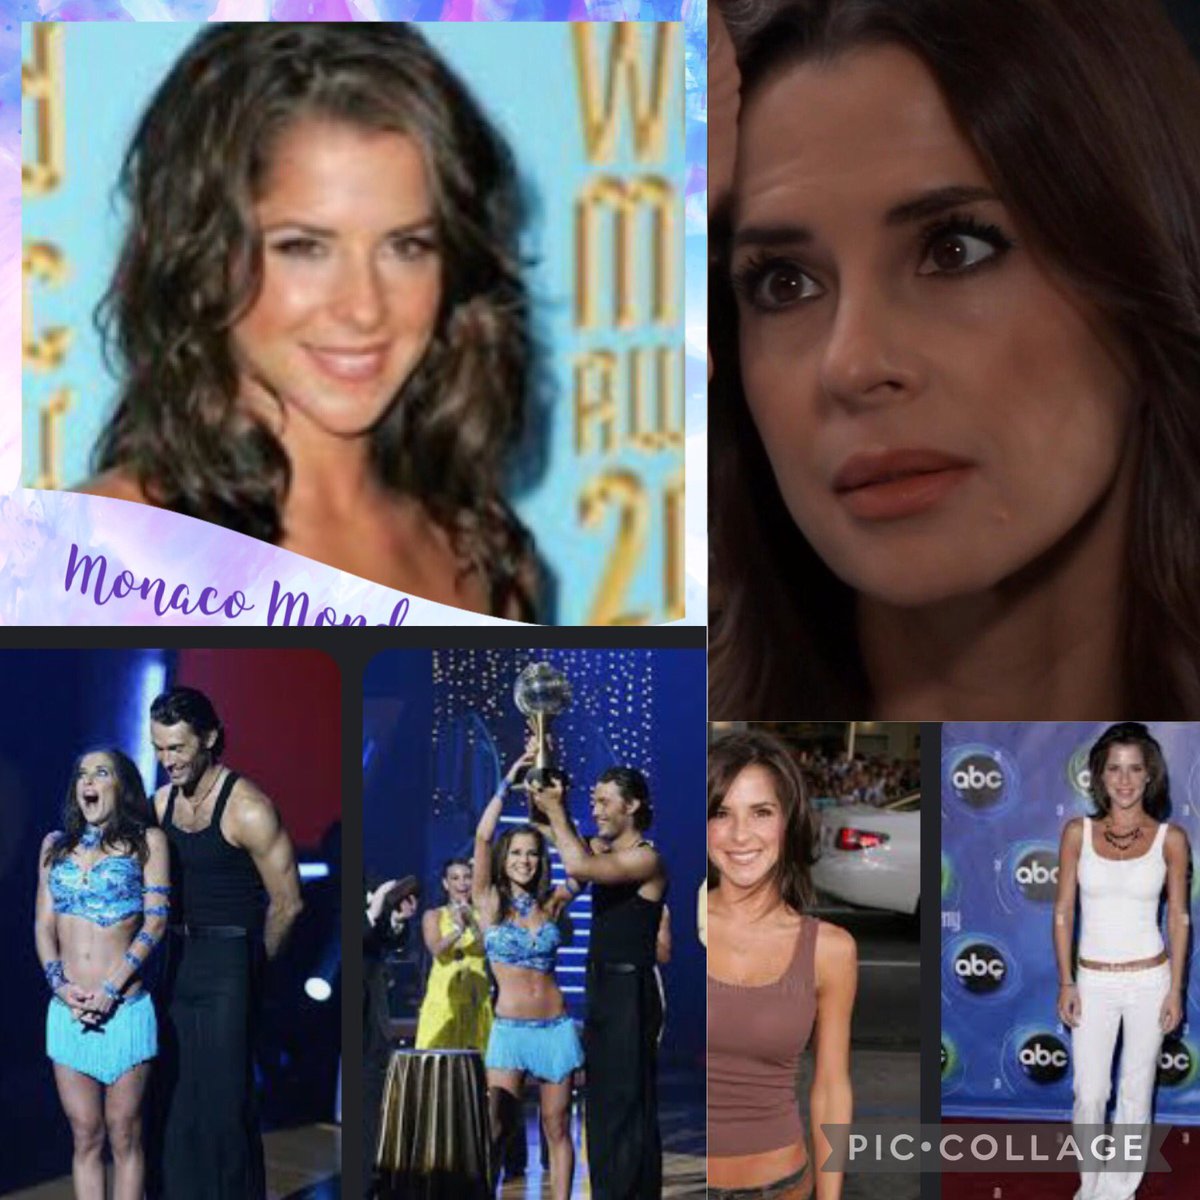 Happy Monday @kellymonaco1 n fans #MonacoMonday our wonderful girl plays #SamMcCall so well, #GH60  #Kelly20 we’d love a #StoryForSam @GeneralHospital 👏🏽💜👑 our little dancing queen #dwts